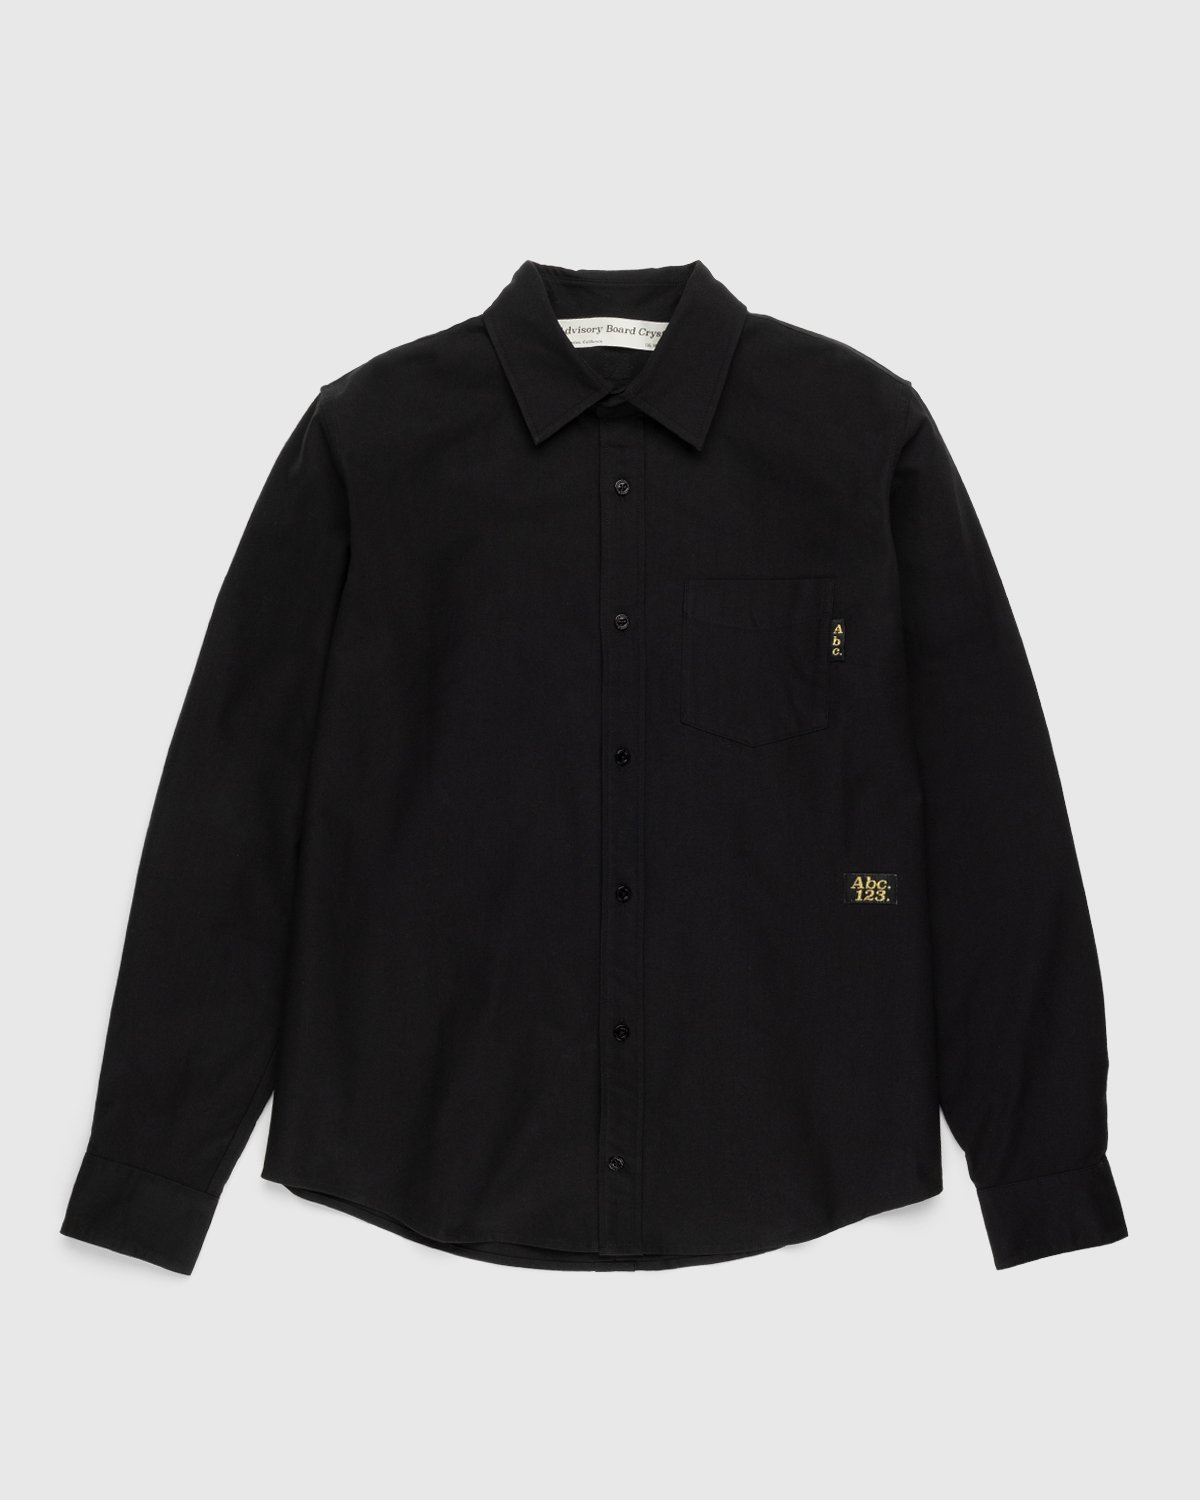 Abc. - Oxford Woven Shirt Anthracite - Clothing - Black - Image 1